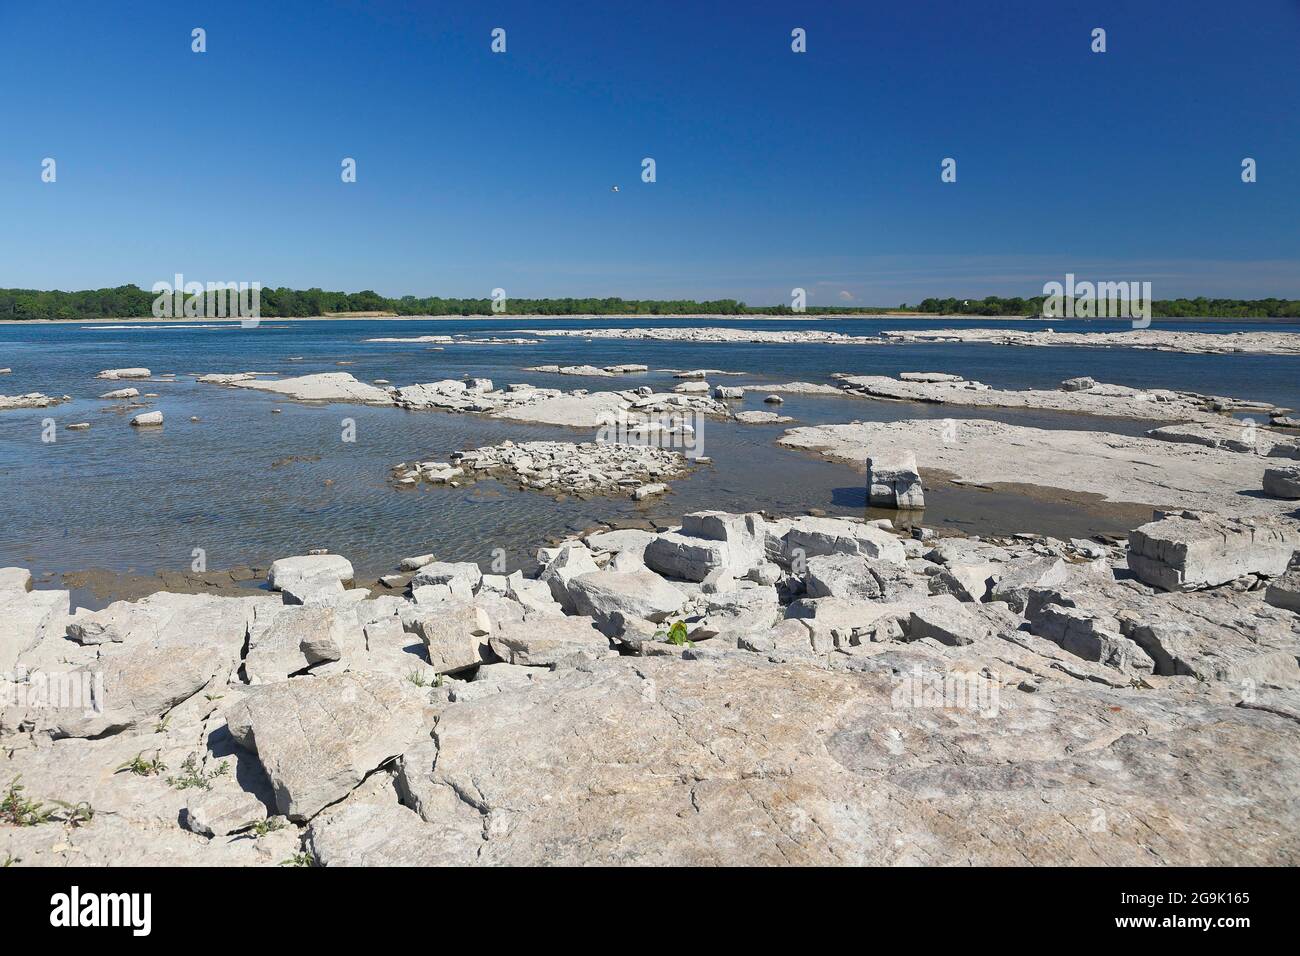 River at low level, Saint Lawrence River, Province of Quebec, Canada Stock Photo